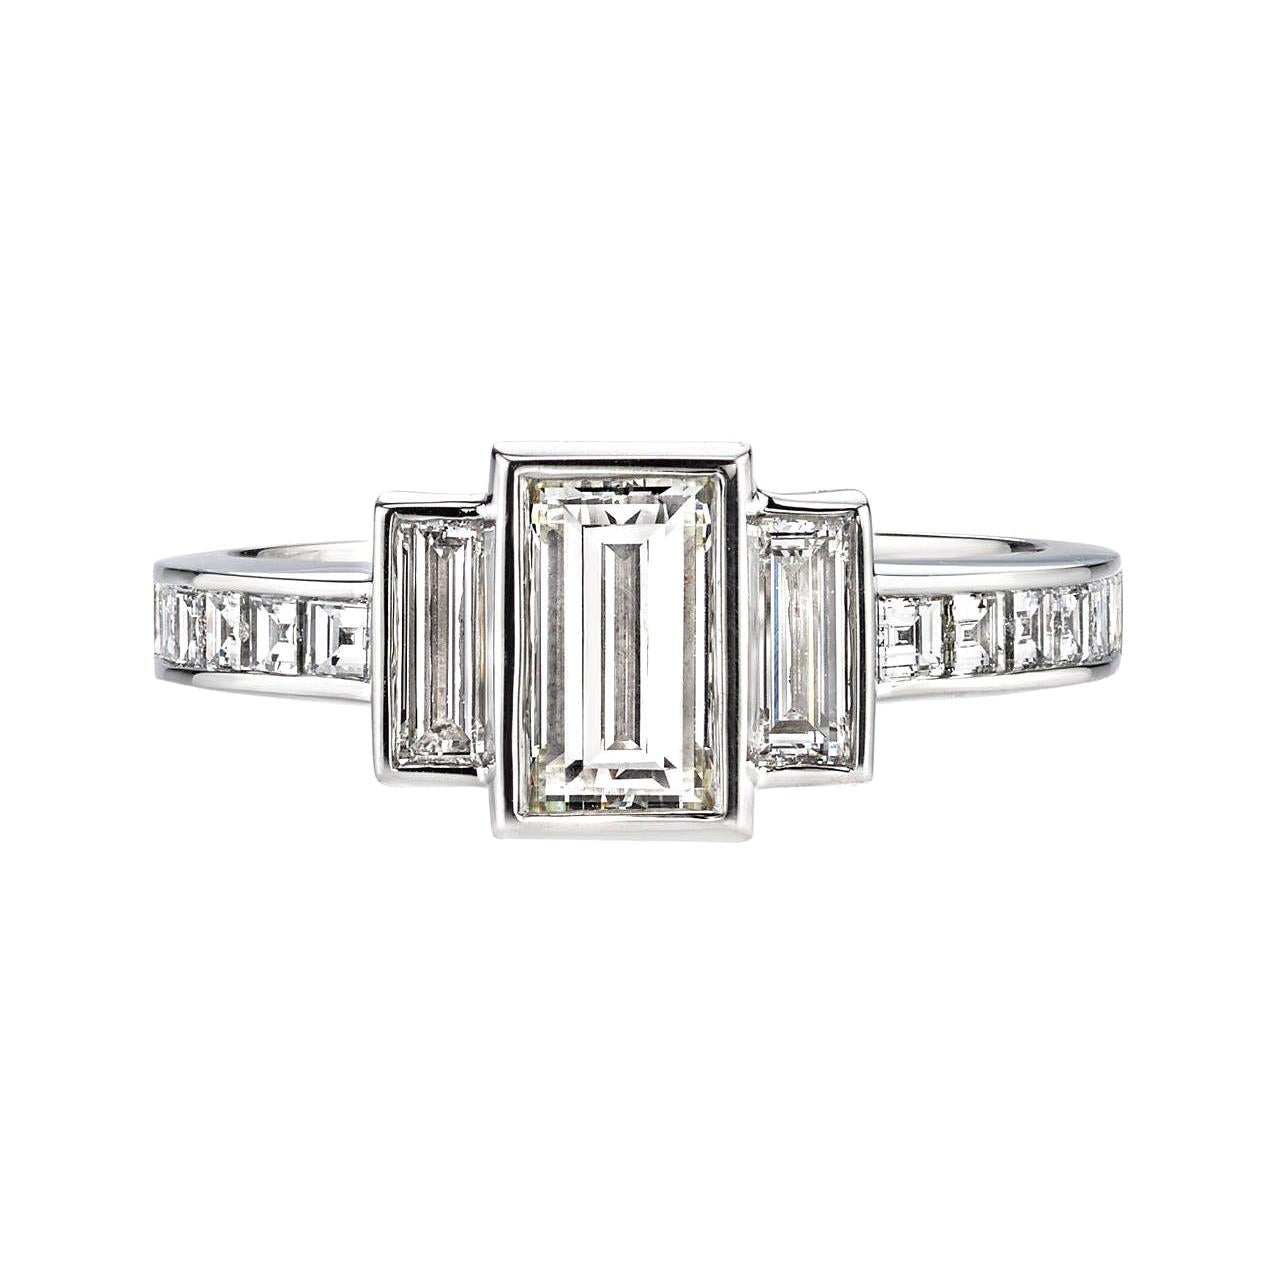 Handcrafted Lisa Emerald Cut Diamond Ring by Single Stone